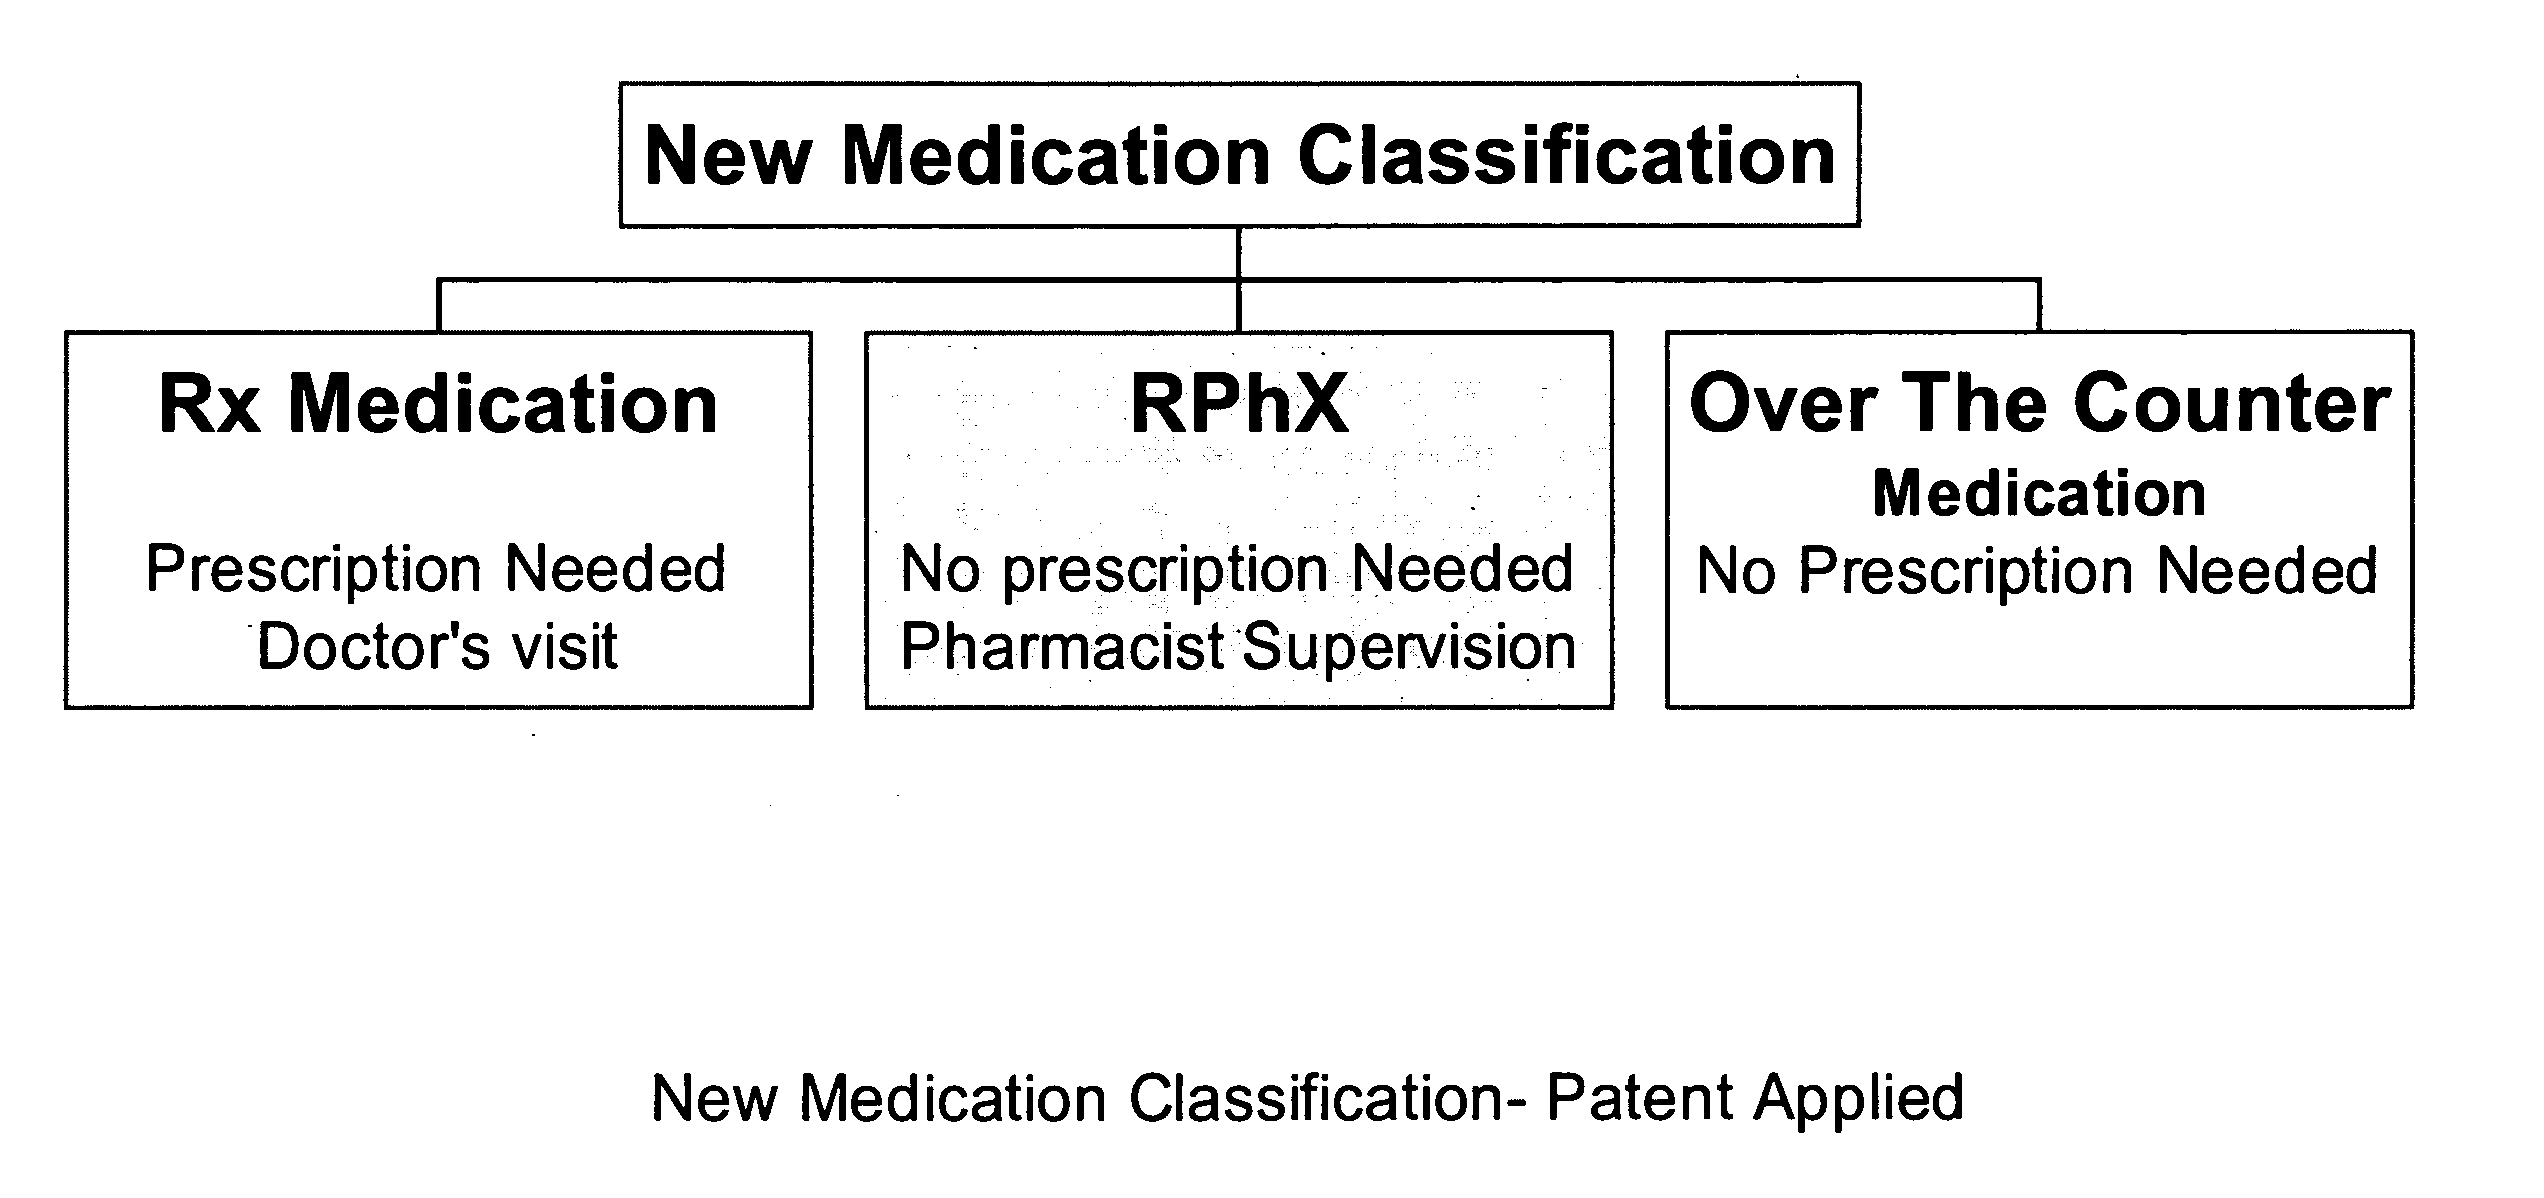 Class of medications is proposed, named RPhX®